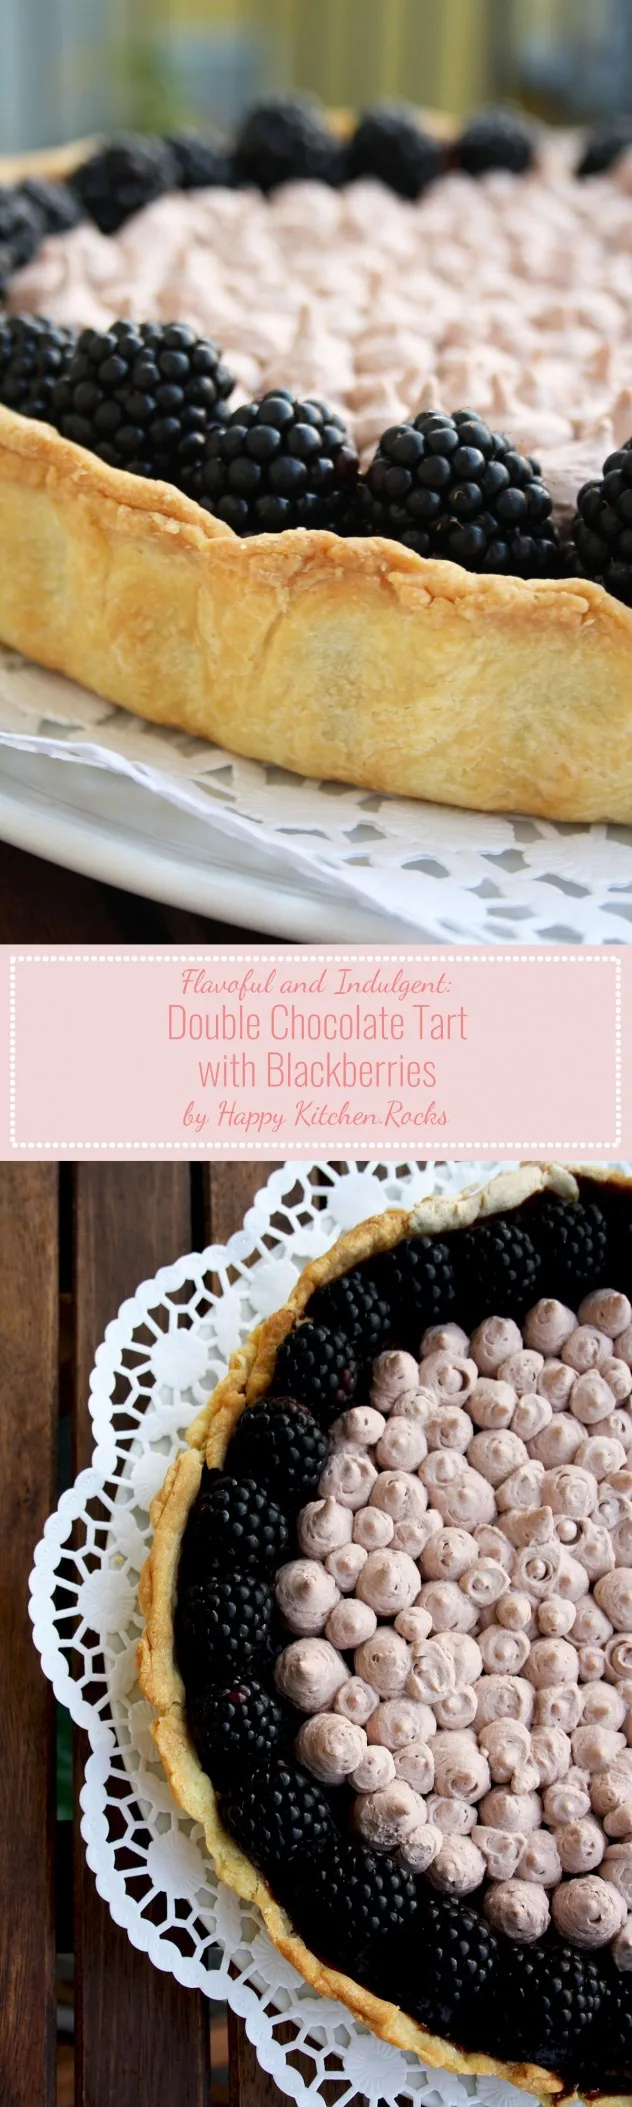 Double Chocolate Tart with Blackberries Recipe: extremely rich, flavorful, indulgent and intensely chocolaty dessert for special occasions.